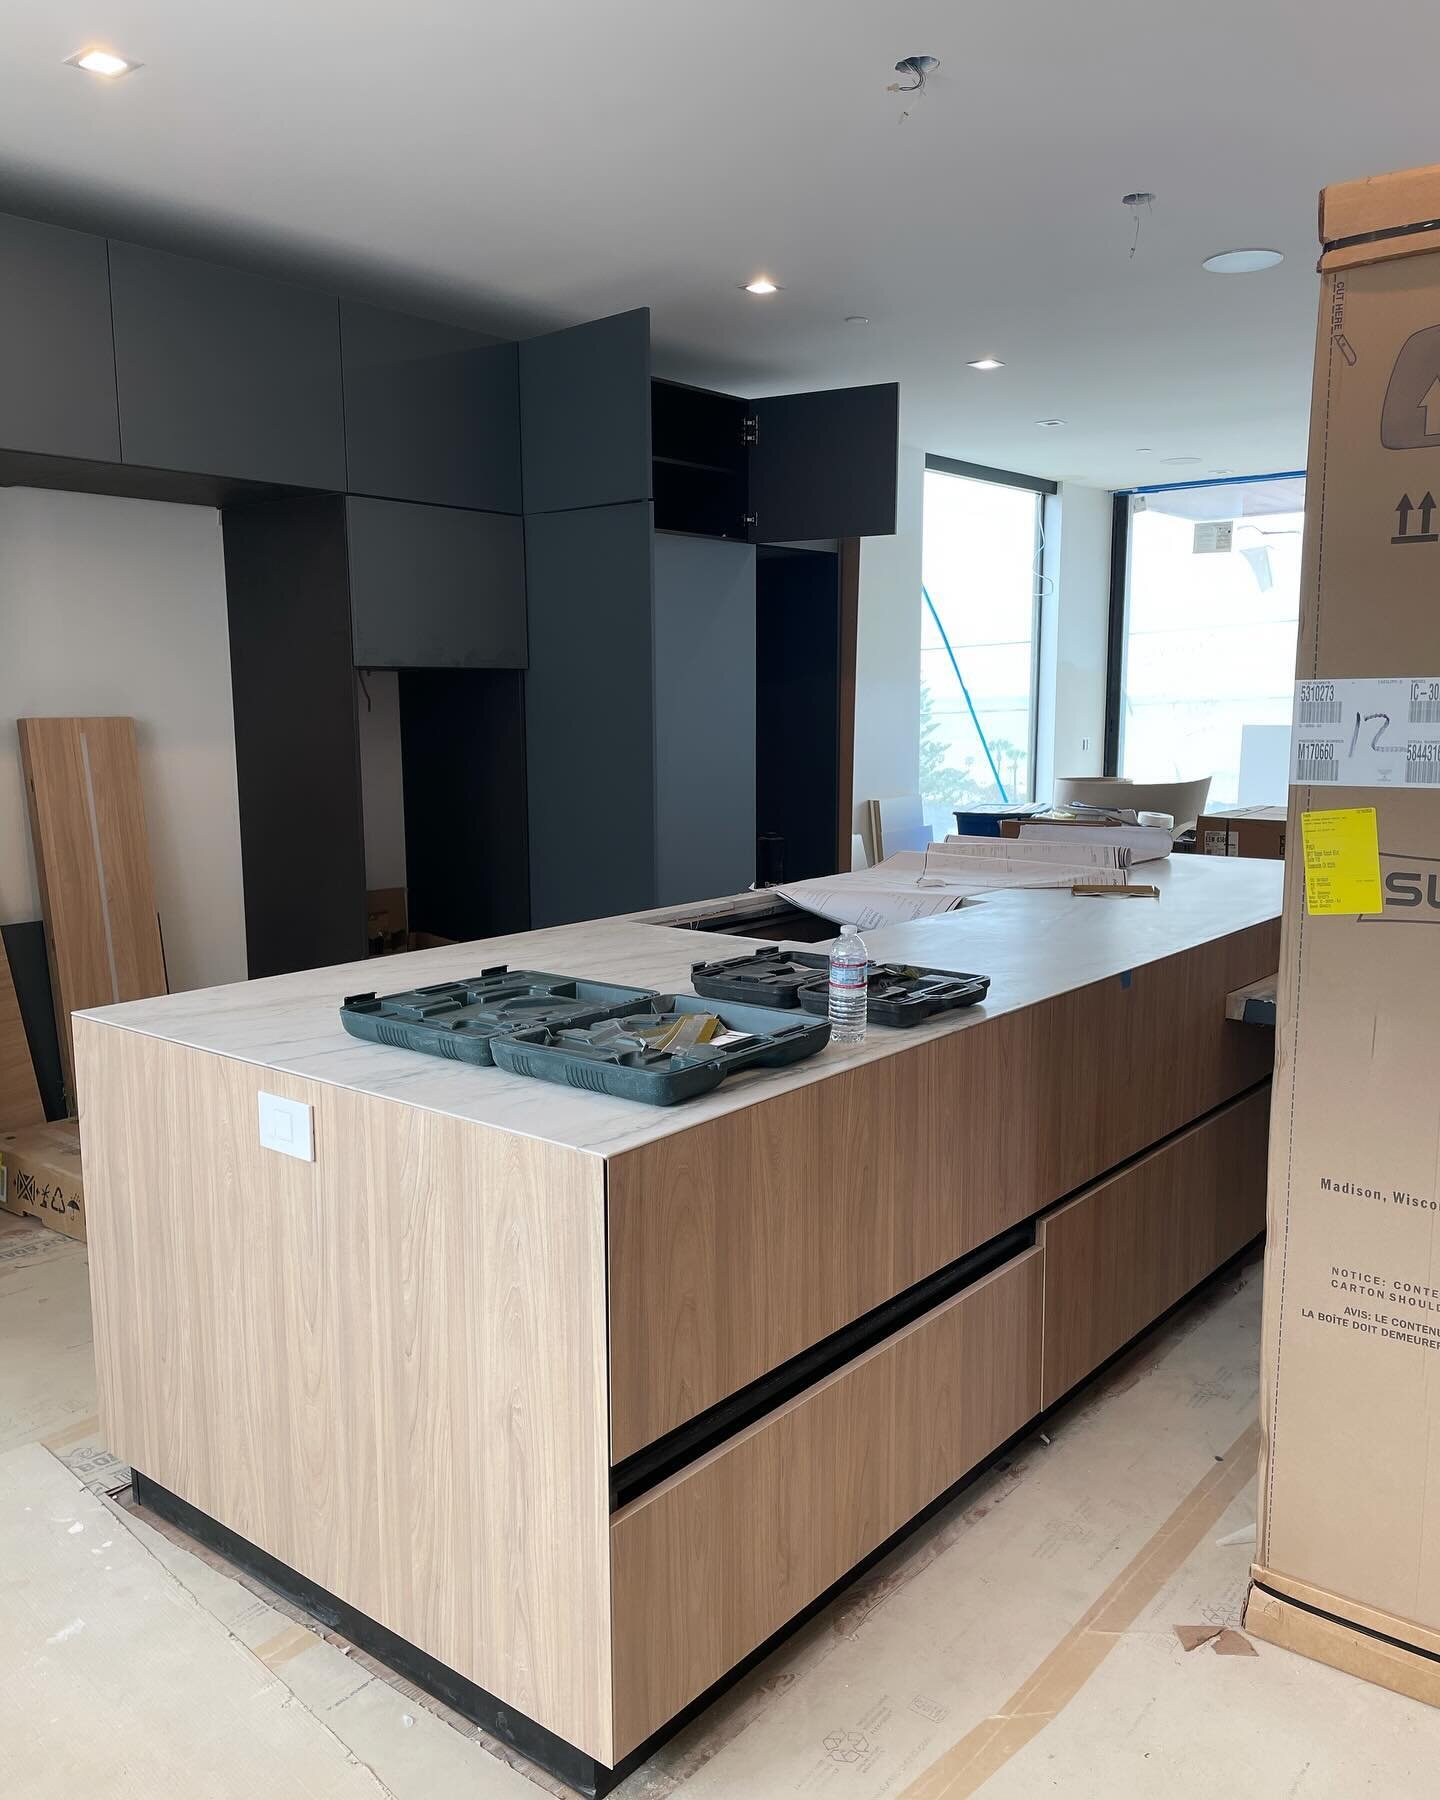 install photos of our @arancucine kitchen going in&mdash;so sleek and beautiful, i hope i&rsquo;m invited to all the dinner parties here, especially as the client is a notable chef🤞🏽 also! one incredibly cool island that pivots out into an extra di